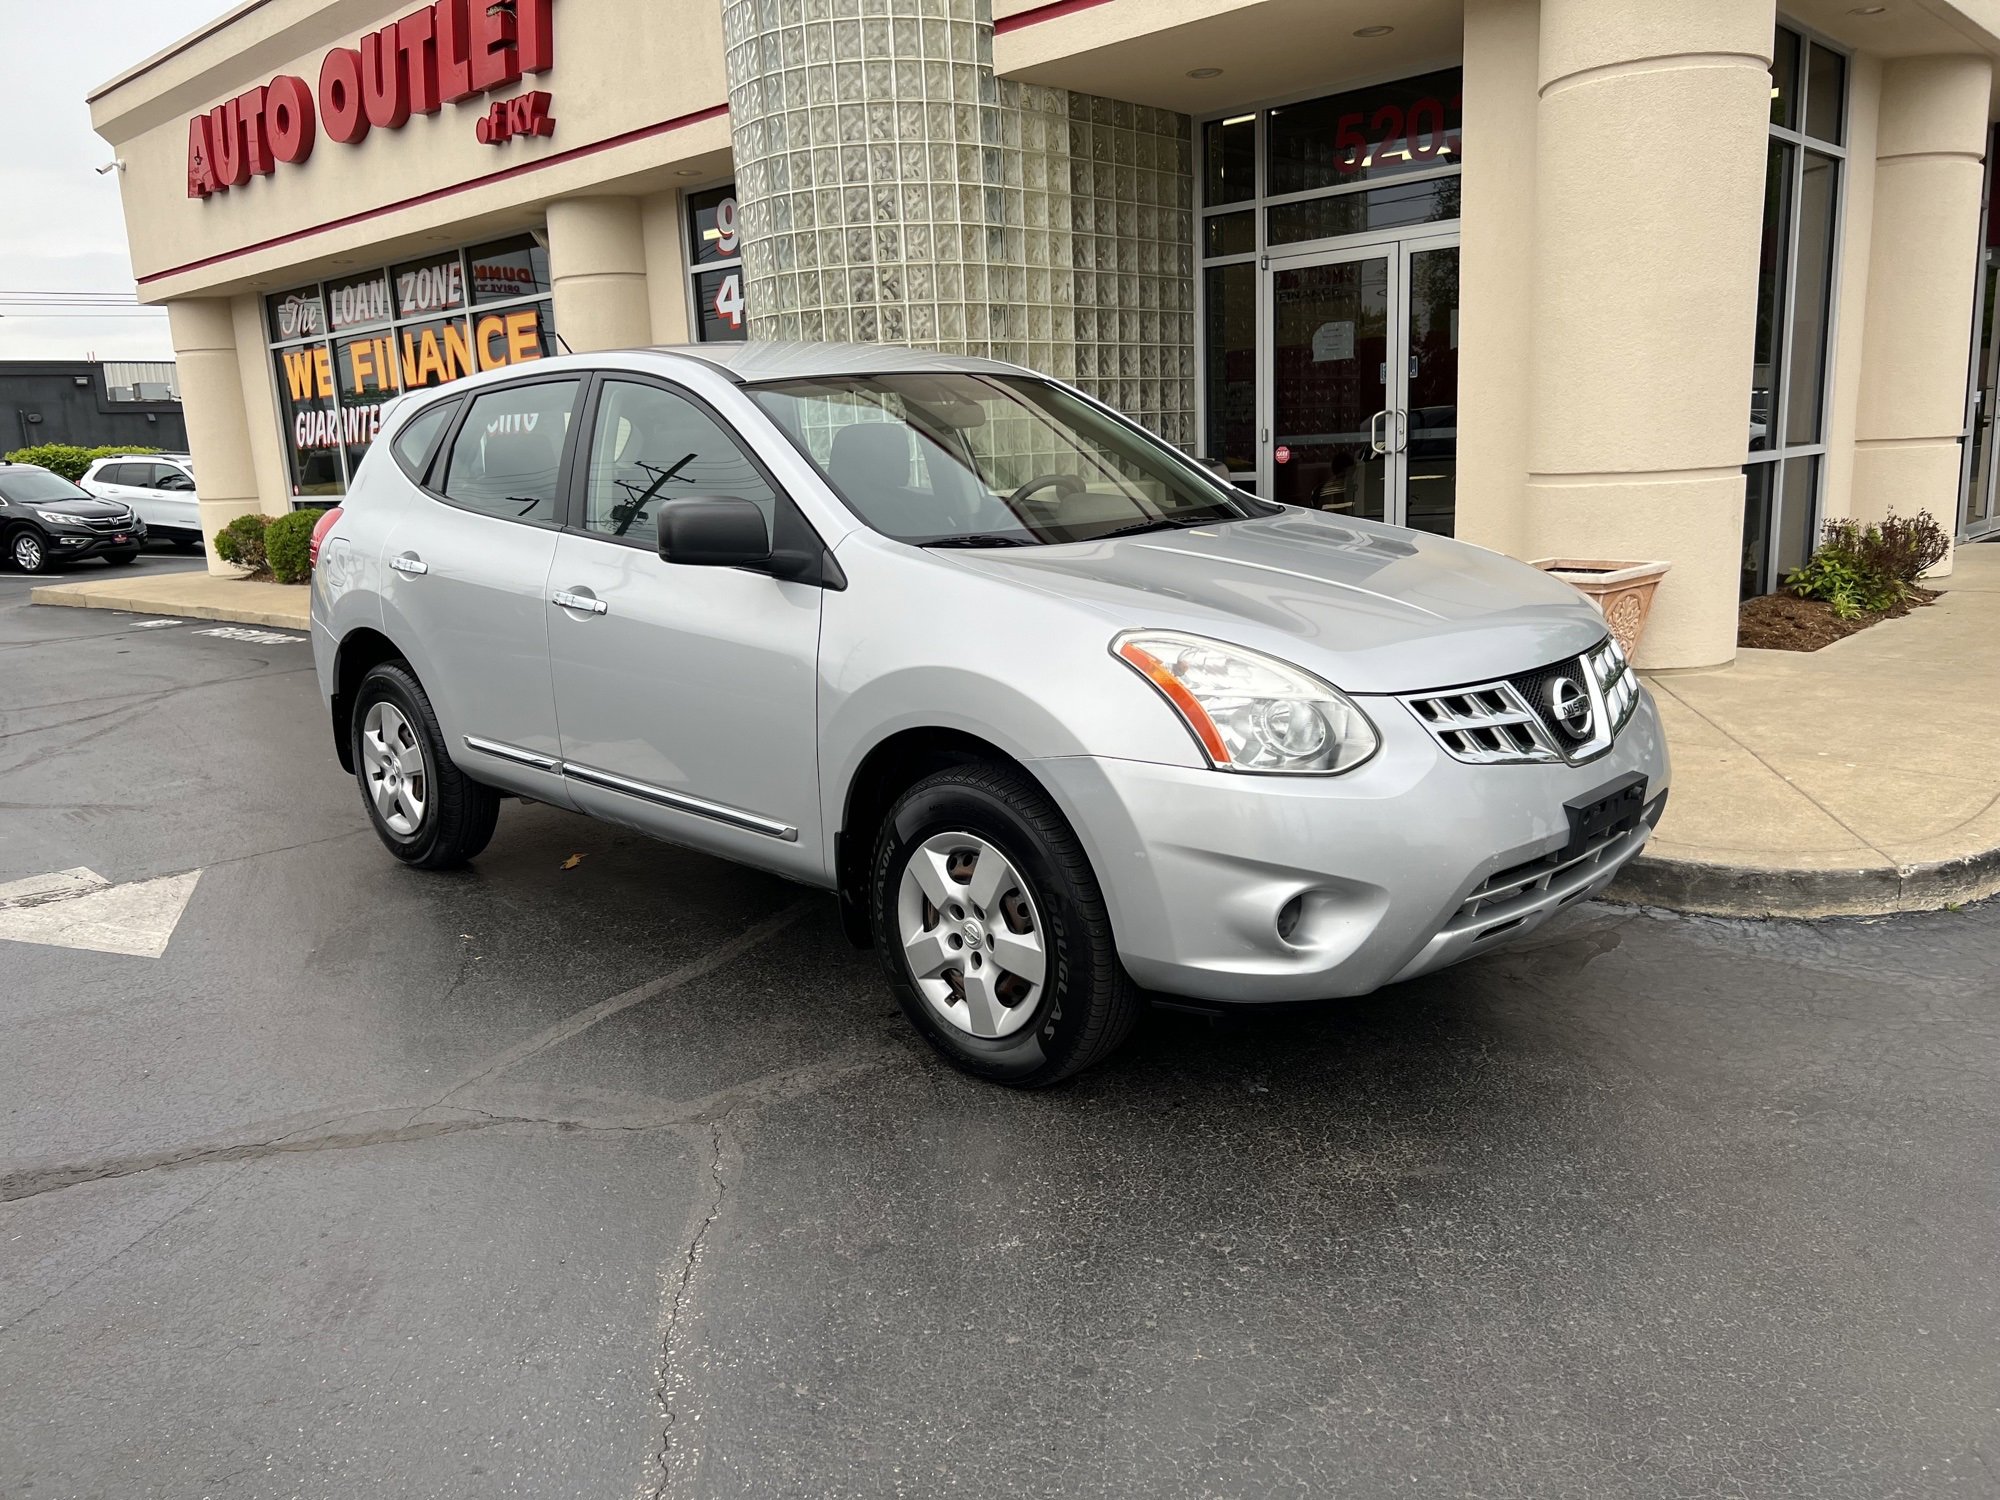 Used 2013 Nissan Rogue for Sale Right Now - Autotrader